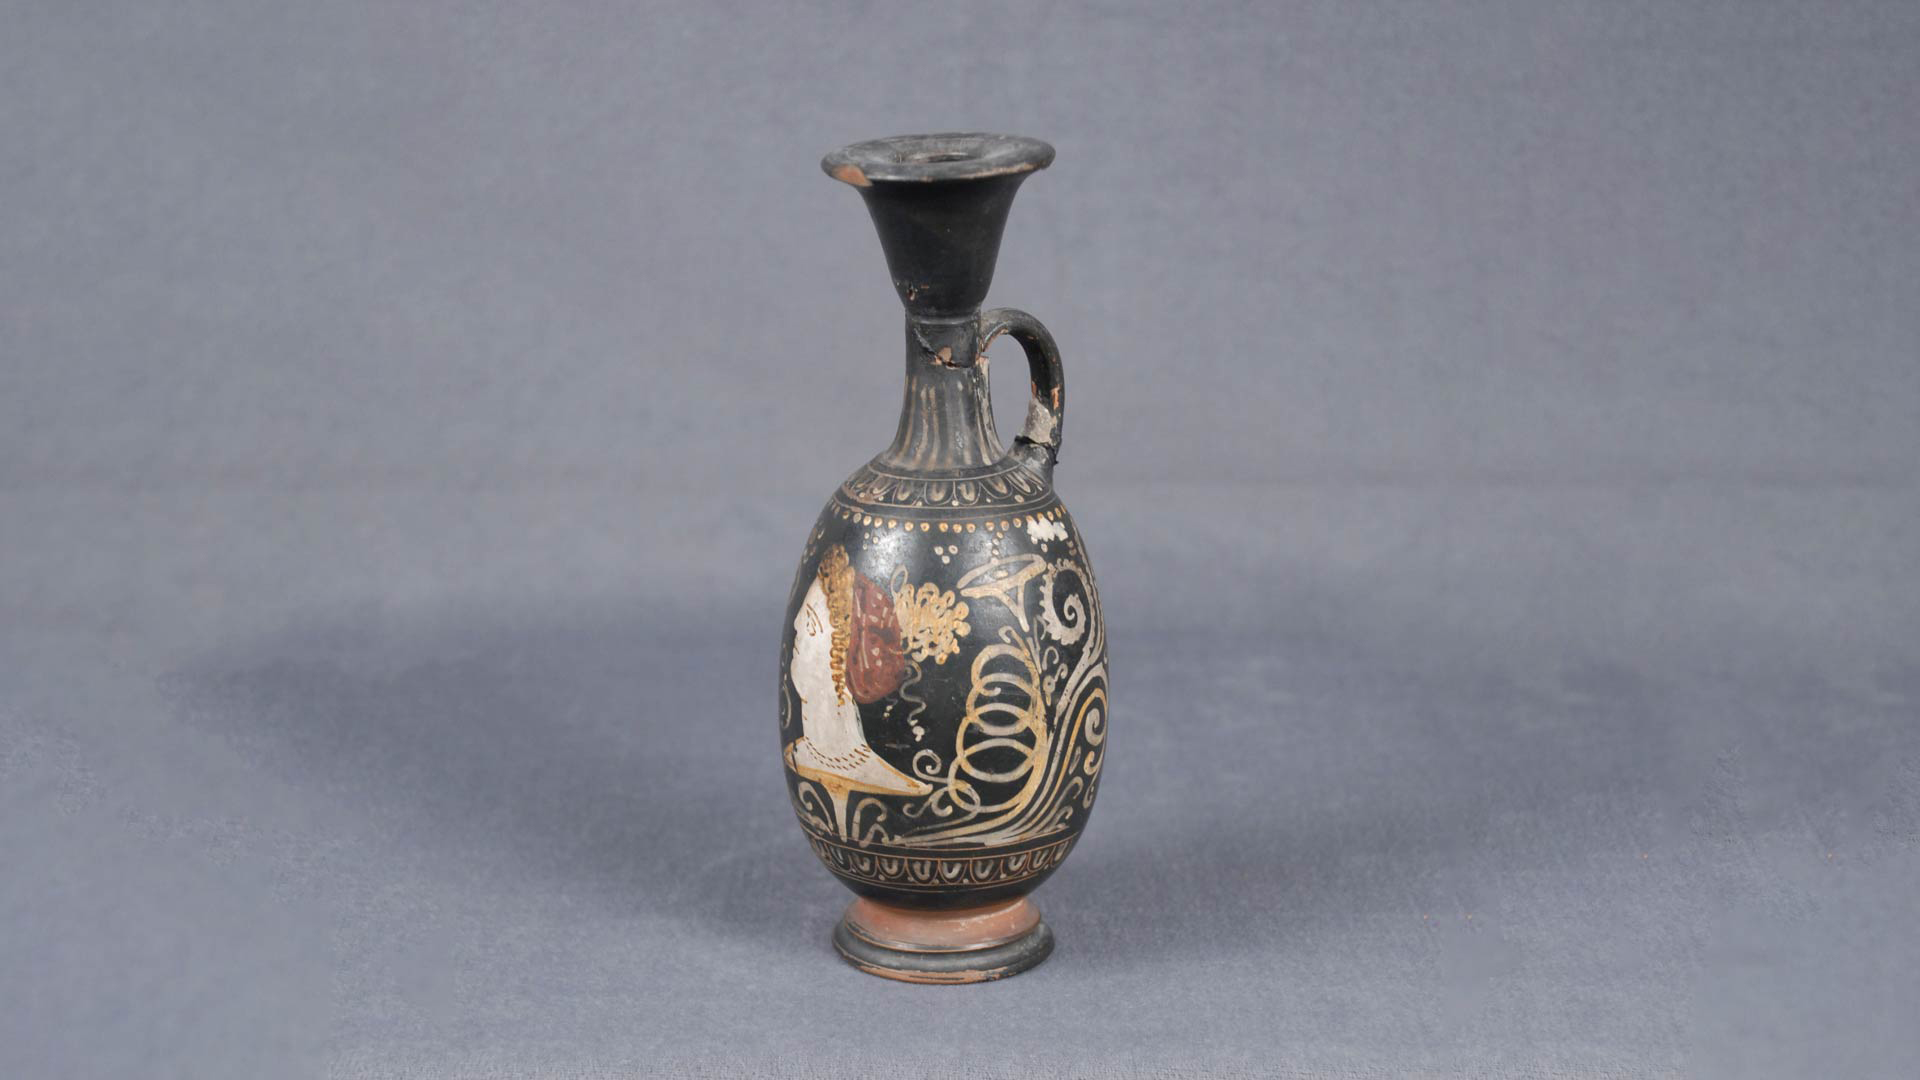 Featured Object: Oil Bottle (Lekythos) overview image